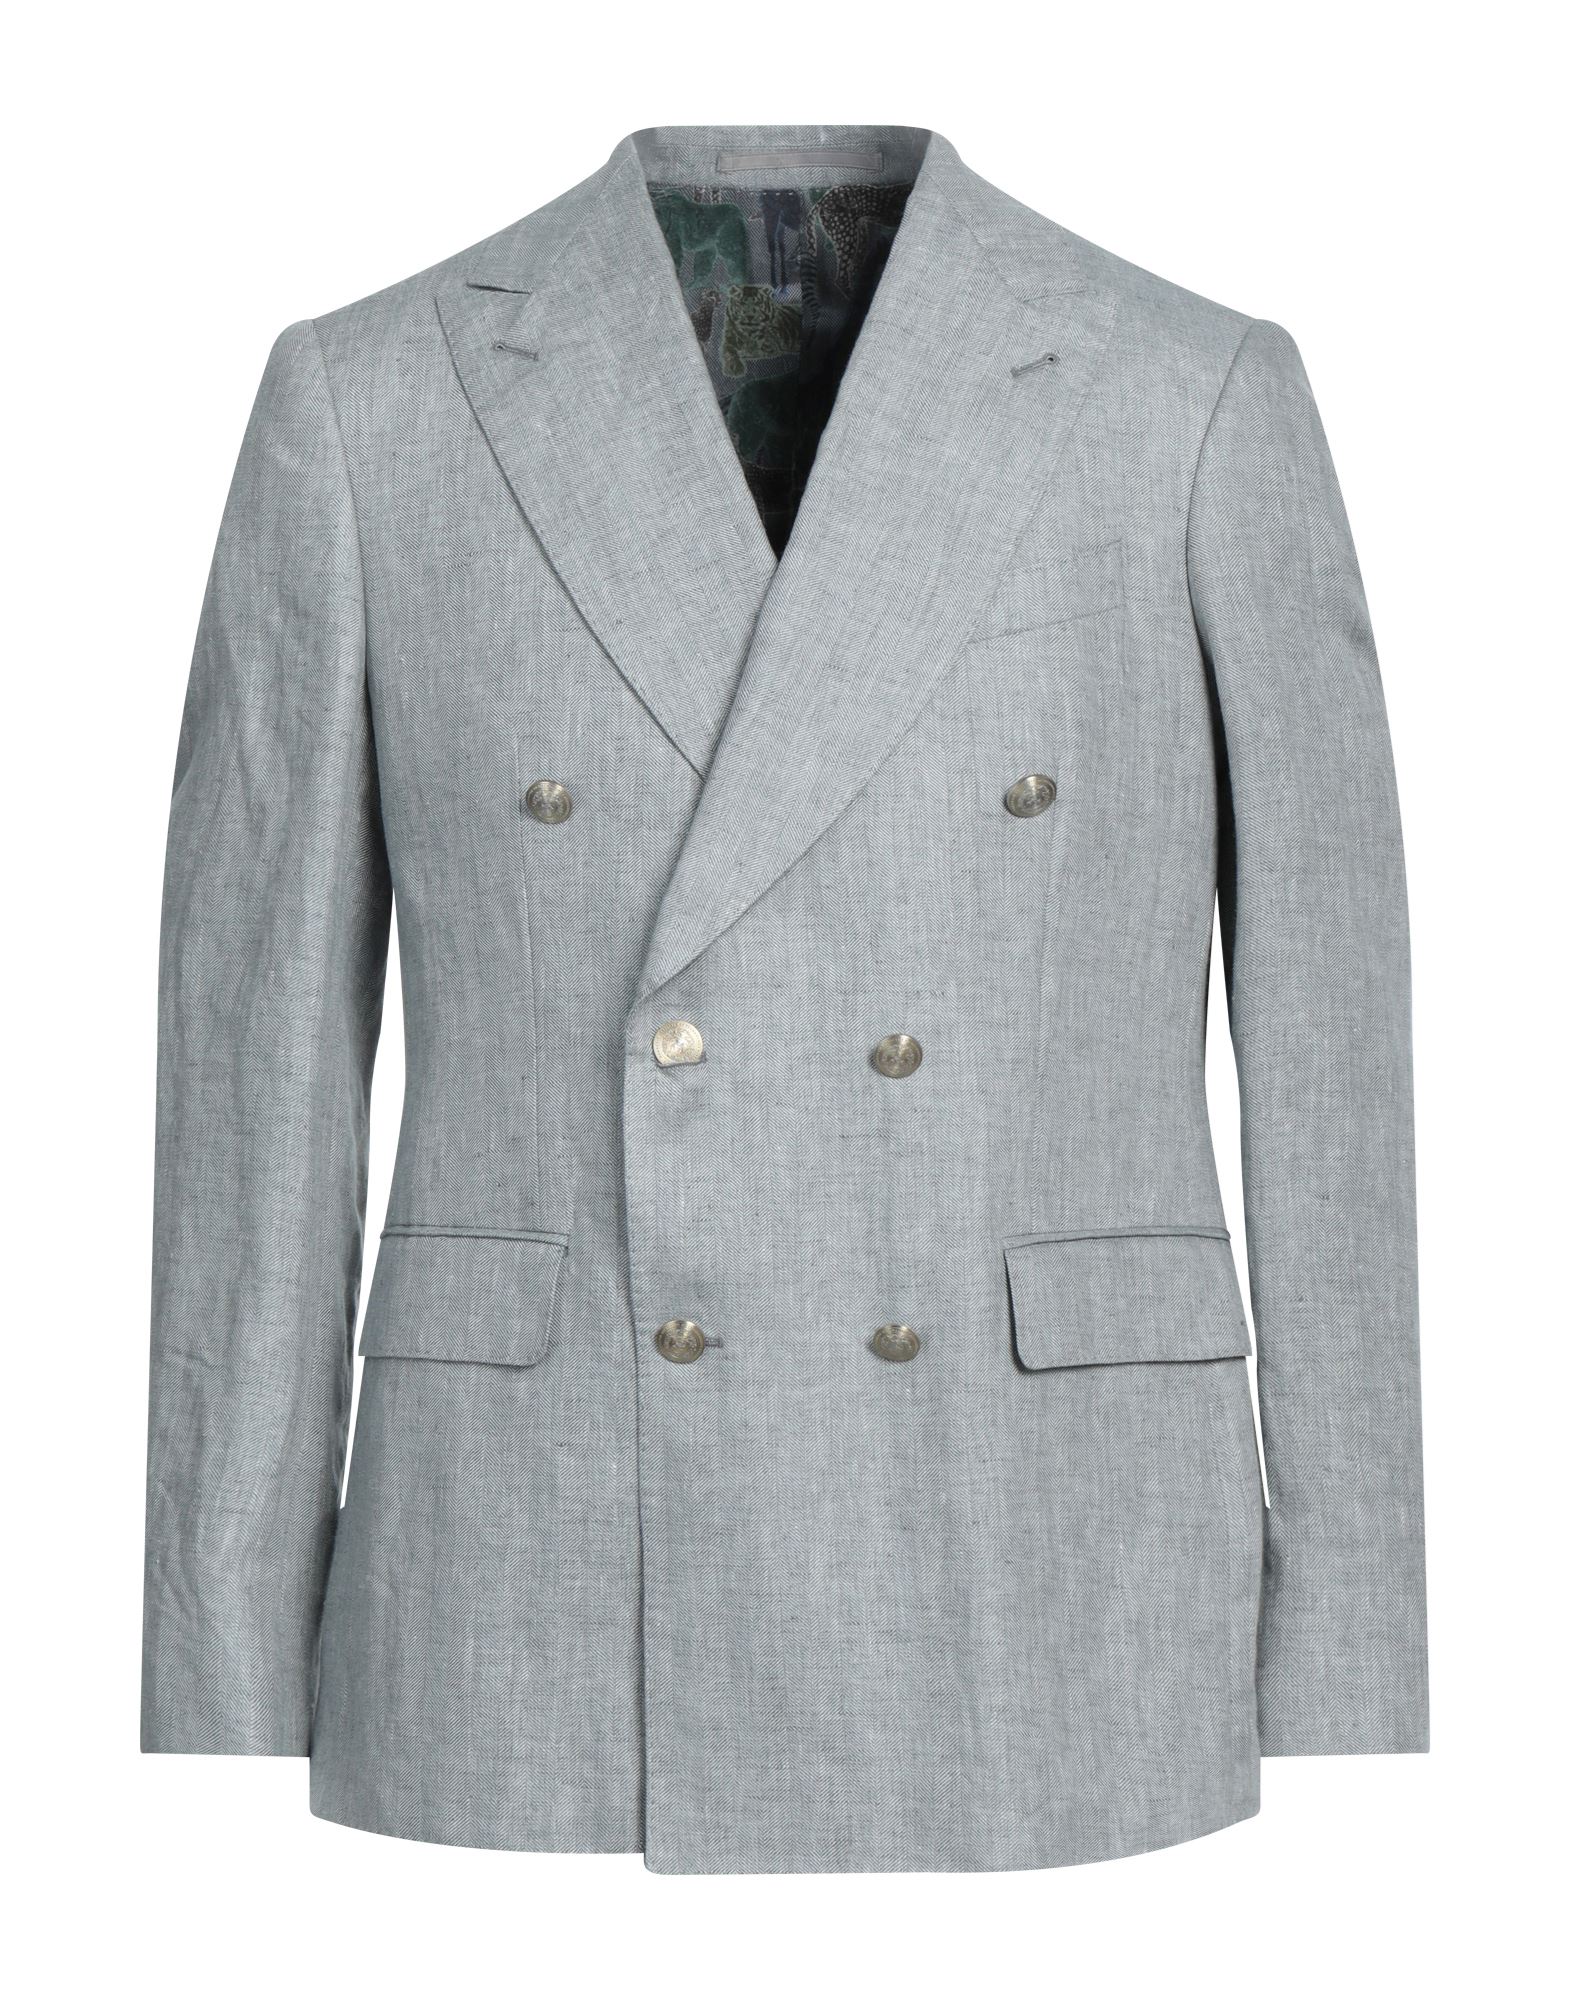 ABSEITS Suit jackets